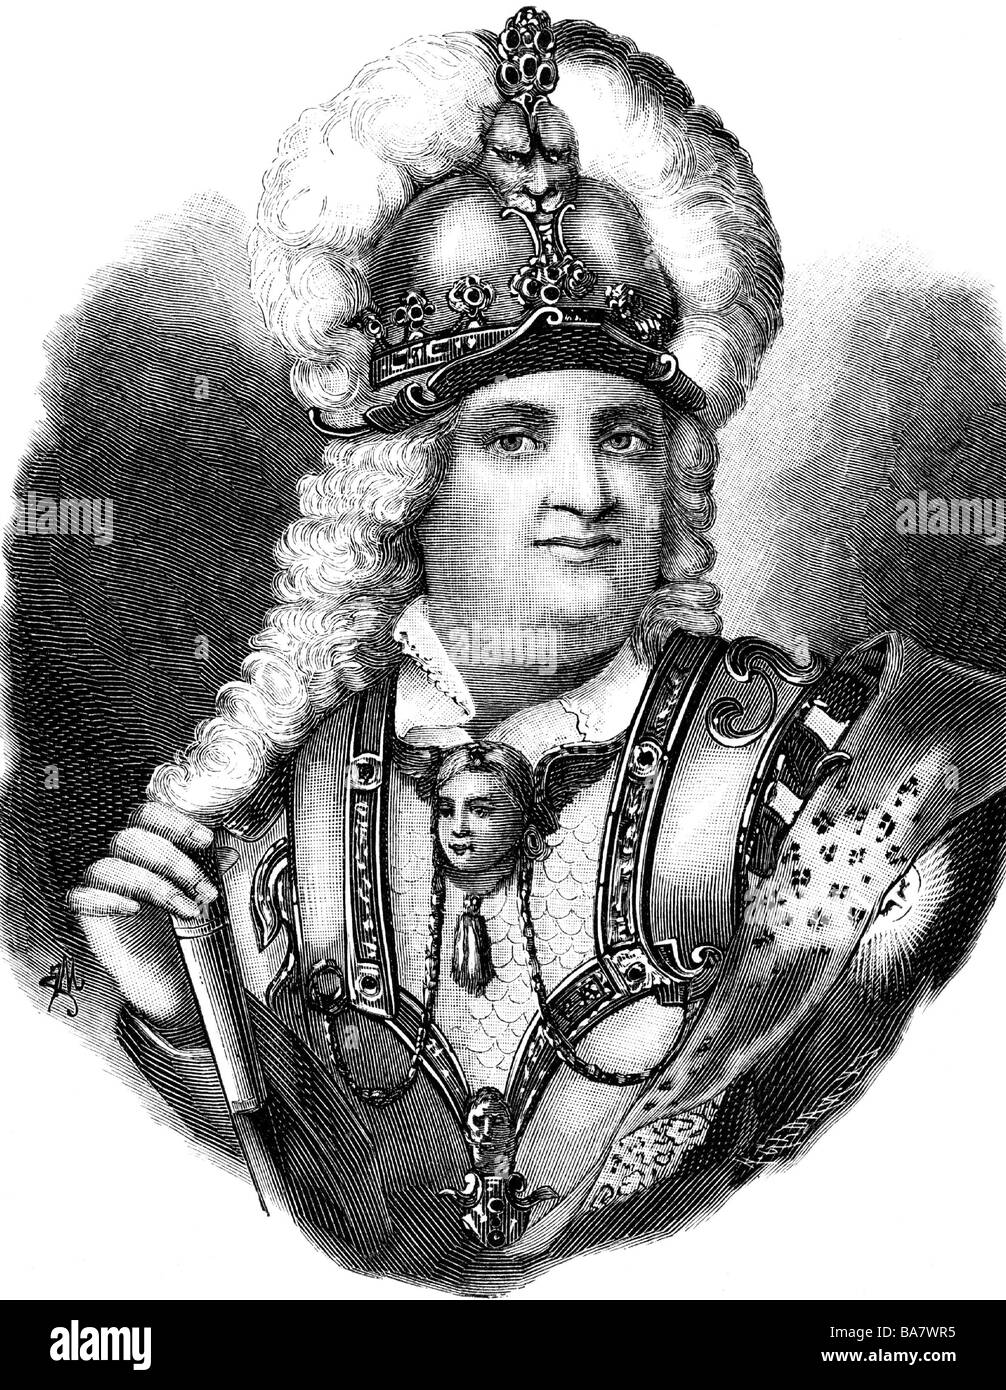 Frederick Augustus I 'the Strong', 12.5.1670 - 1.2.1733, Elector of Saxony since 27.4.1694, King of Poland since 15.9.1697, portrait, wood engraving, 19th century, after image from the 'Green Vault', Dresden, Stock Photo